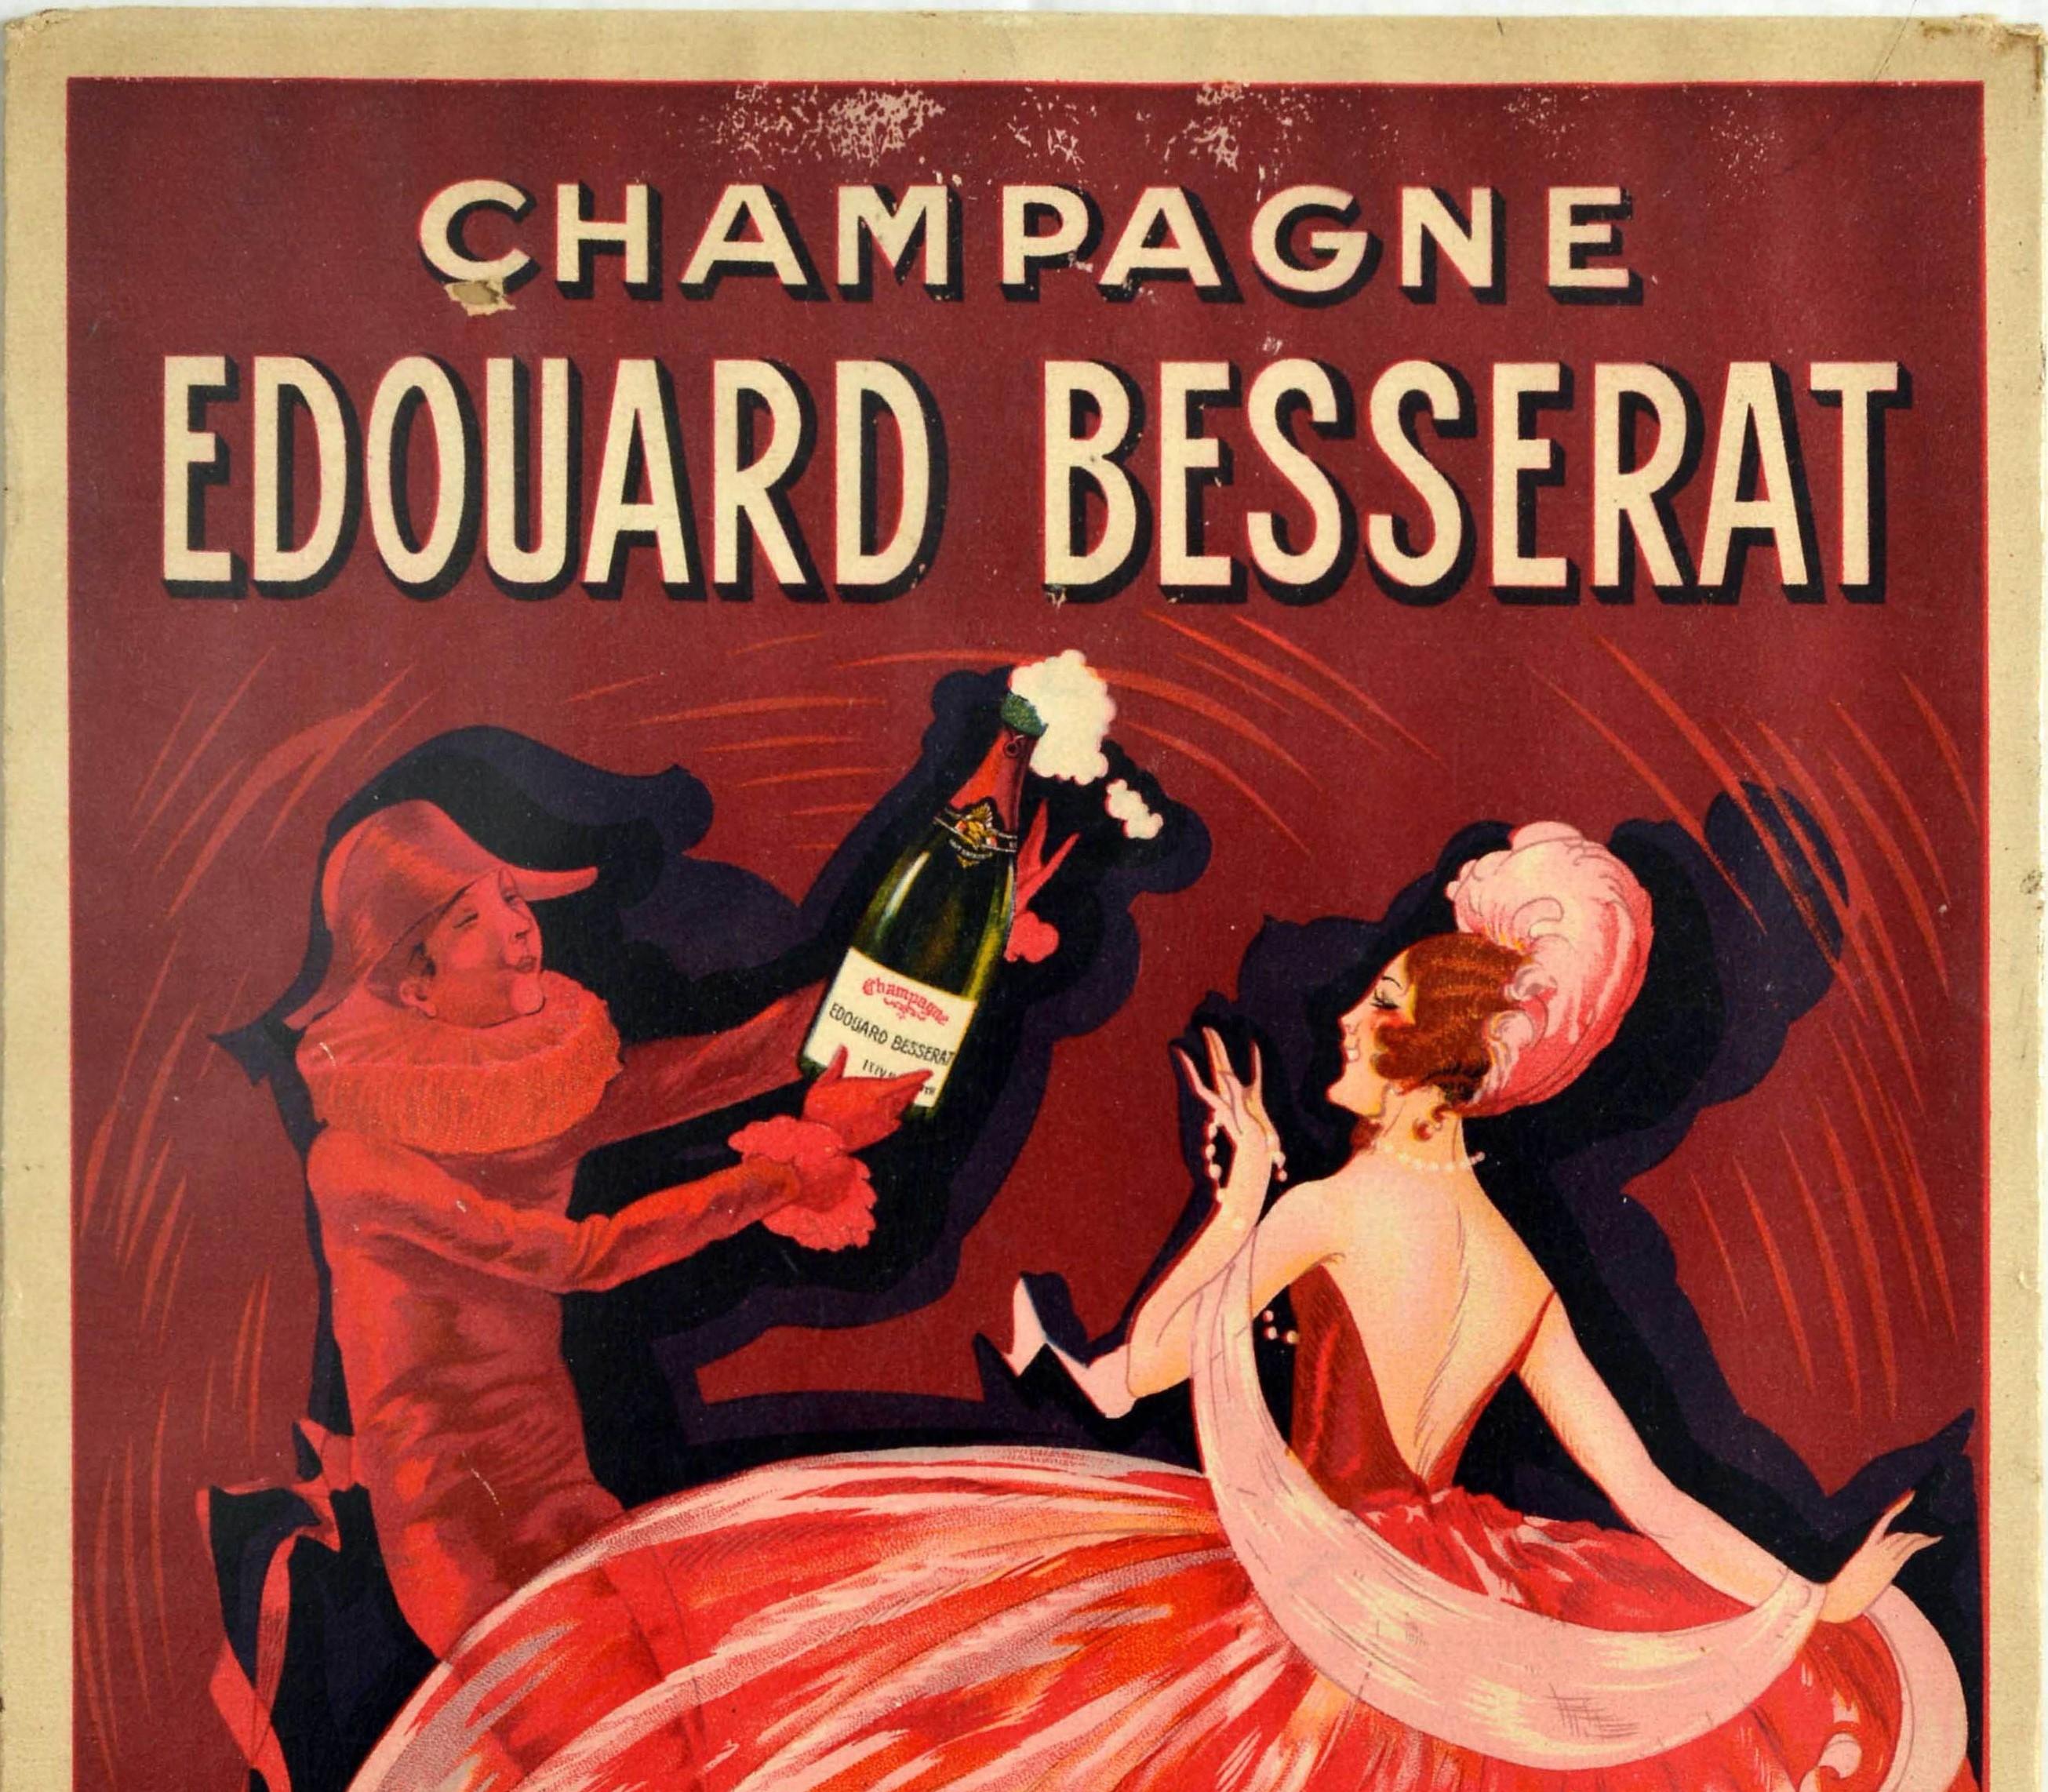 Original antique drink advertising poster for Edouard Besserat Champagne featuring a painting by a French artist Gaston Marechaux (1872-c.1936) of person wearing a hat and pleated ruffle collar outfit in shades of red holding up an open bottle of